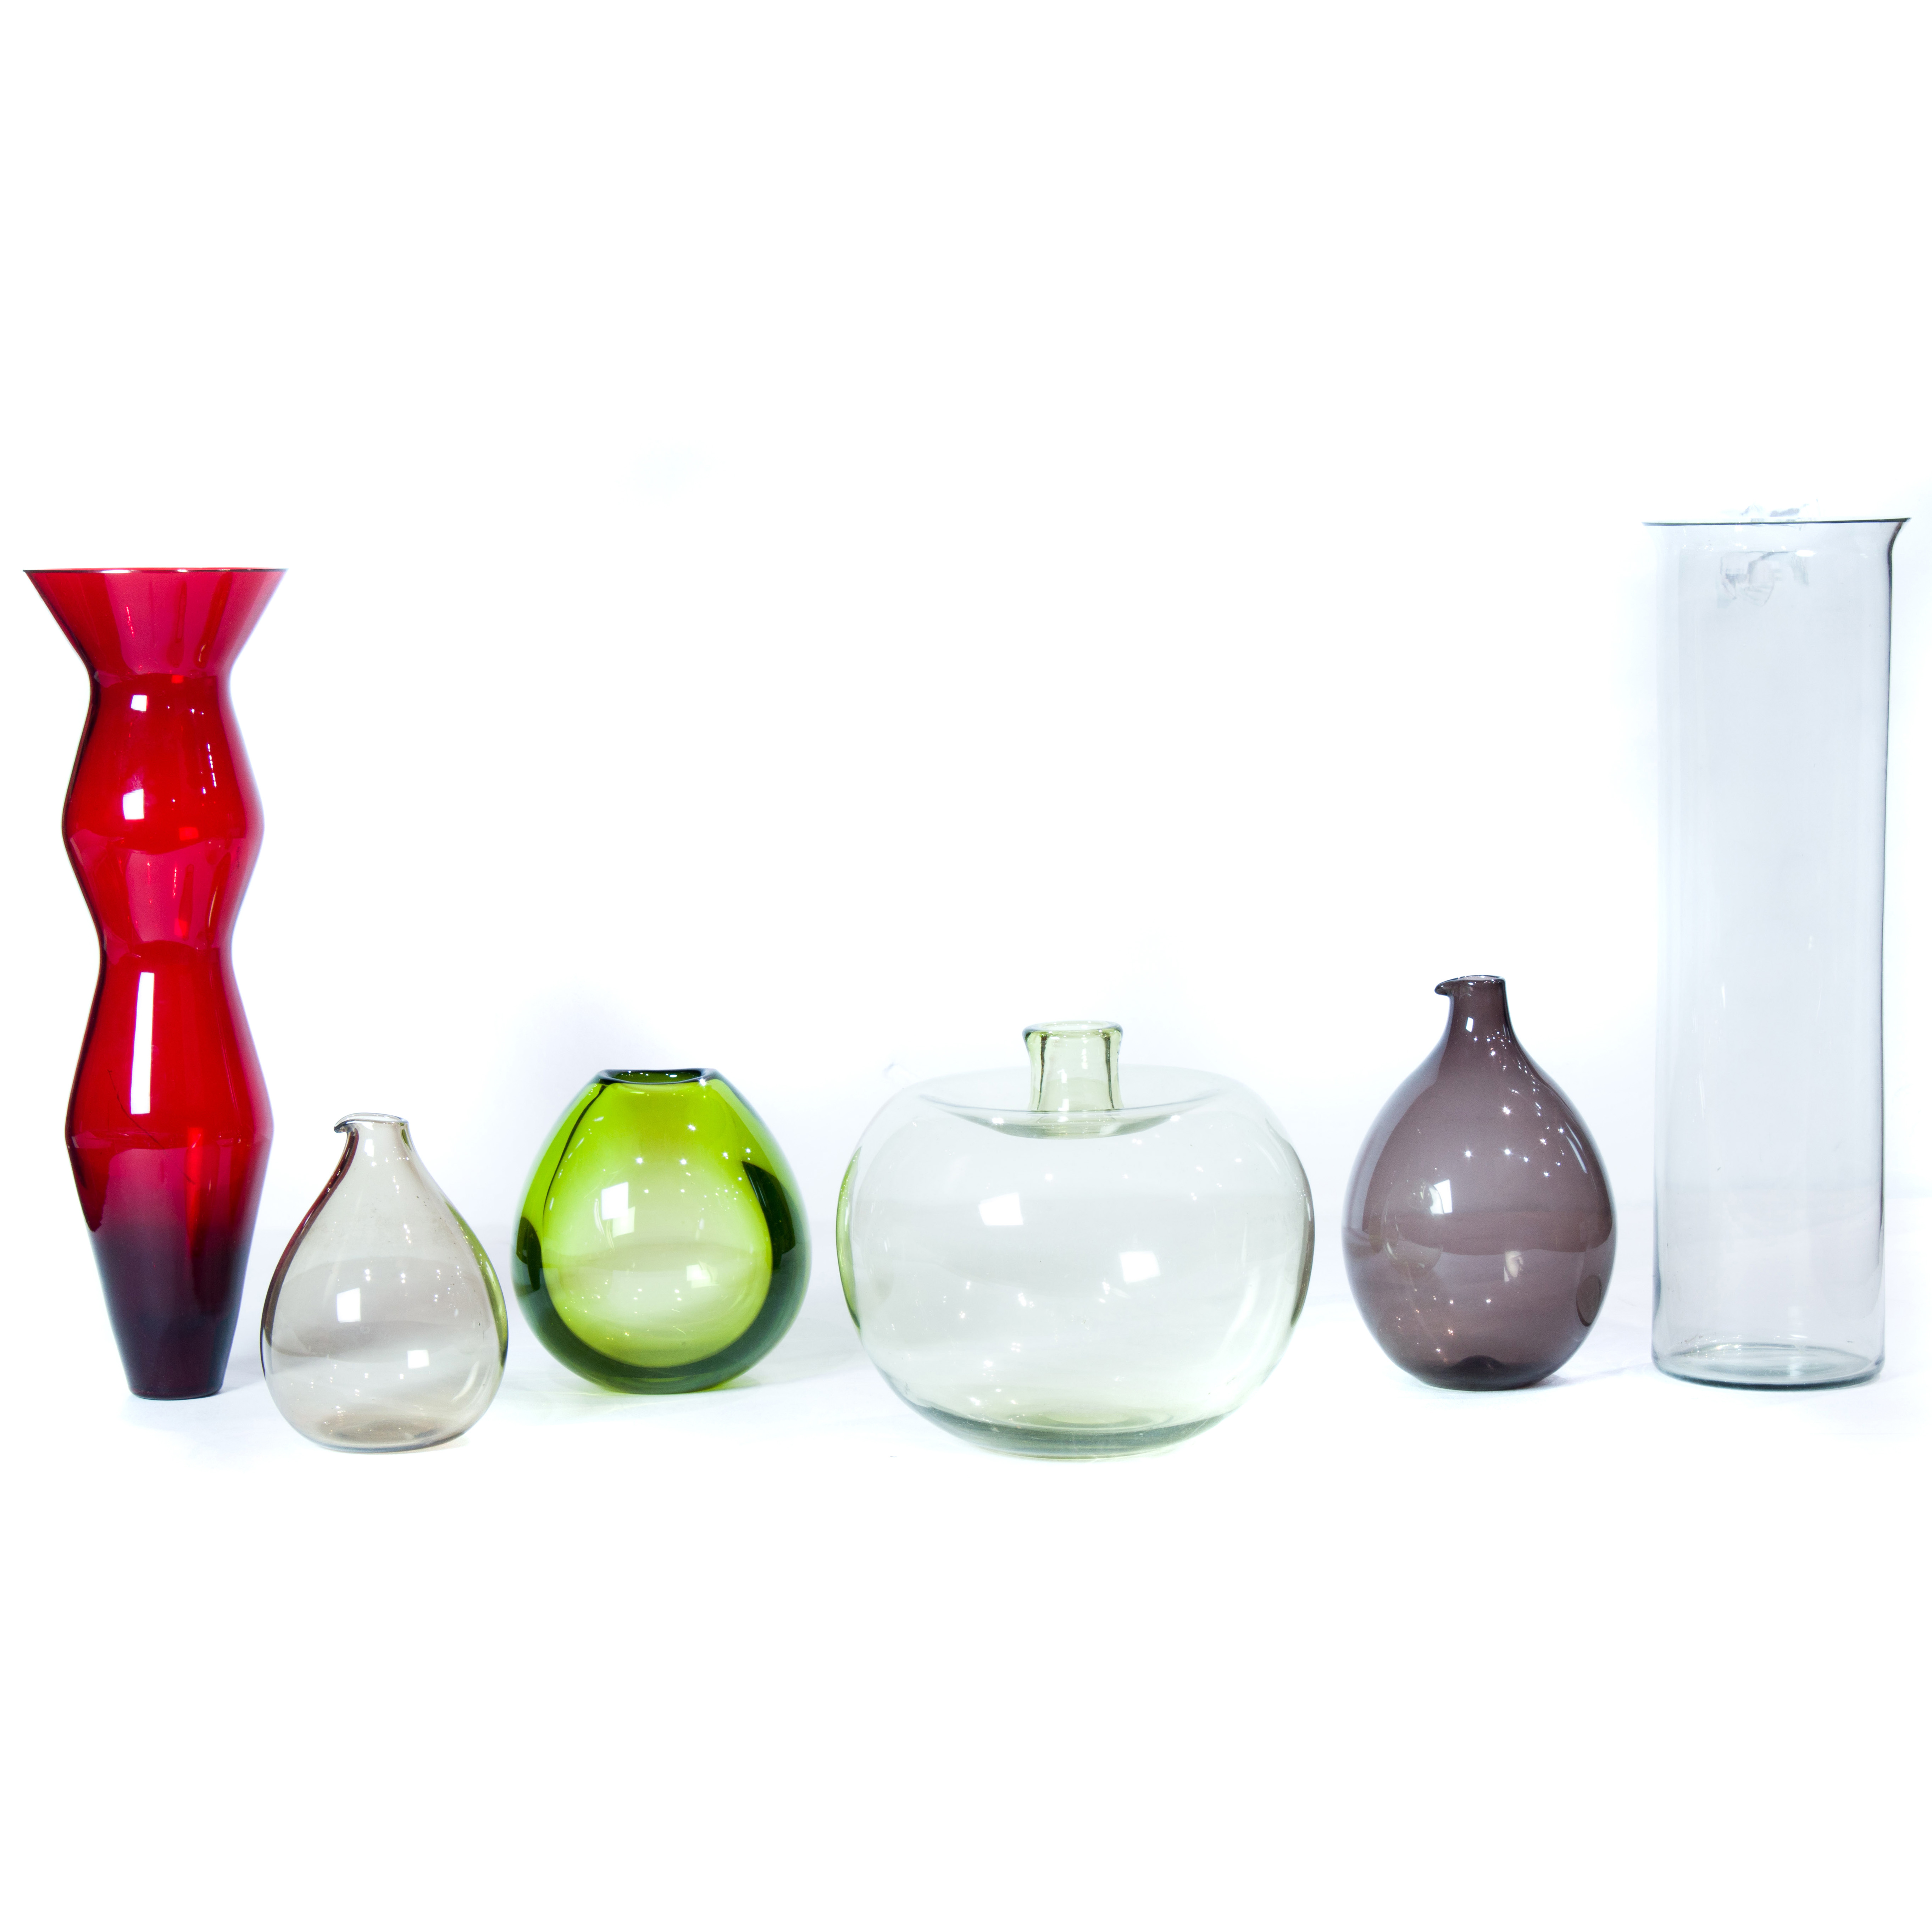  LOT OF 5 COLORED GLASS VASES 3a3502